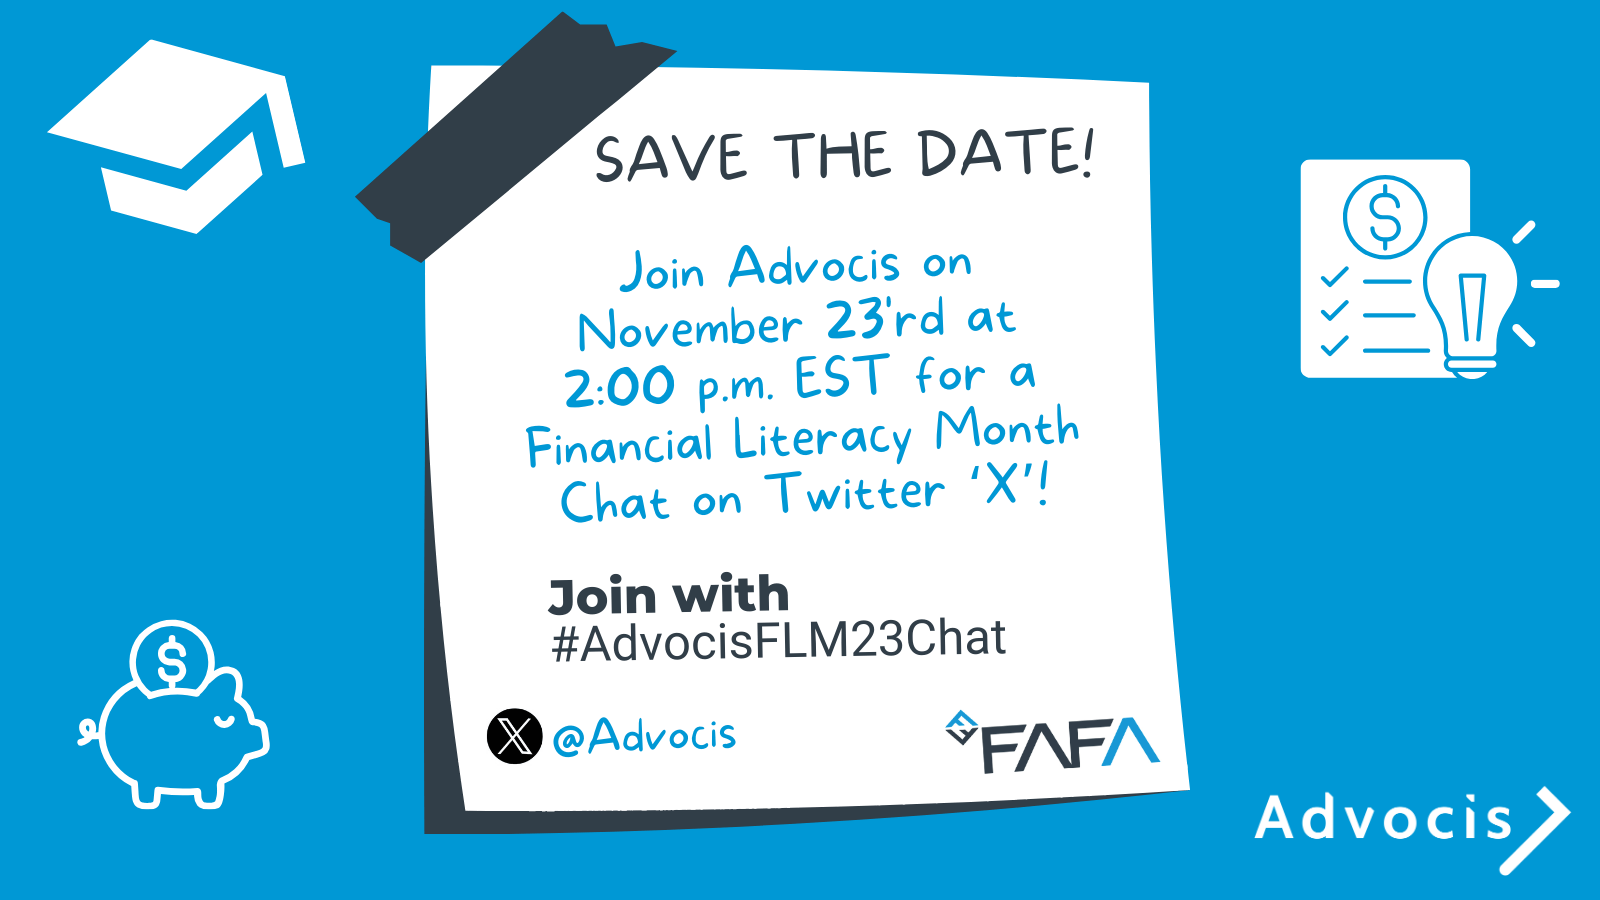 Advocis' Financial Literacy Month Chat